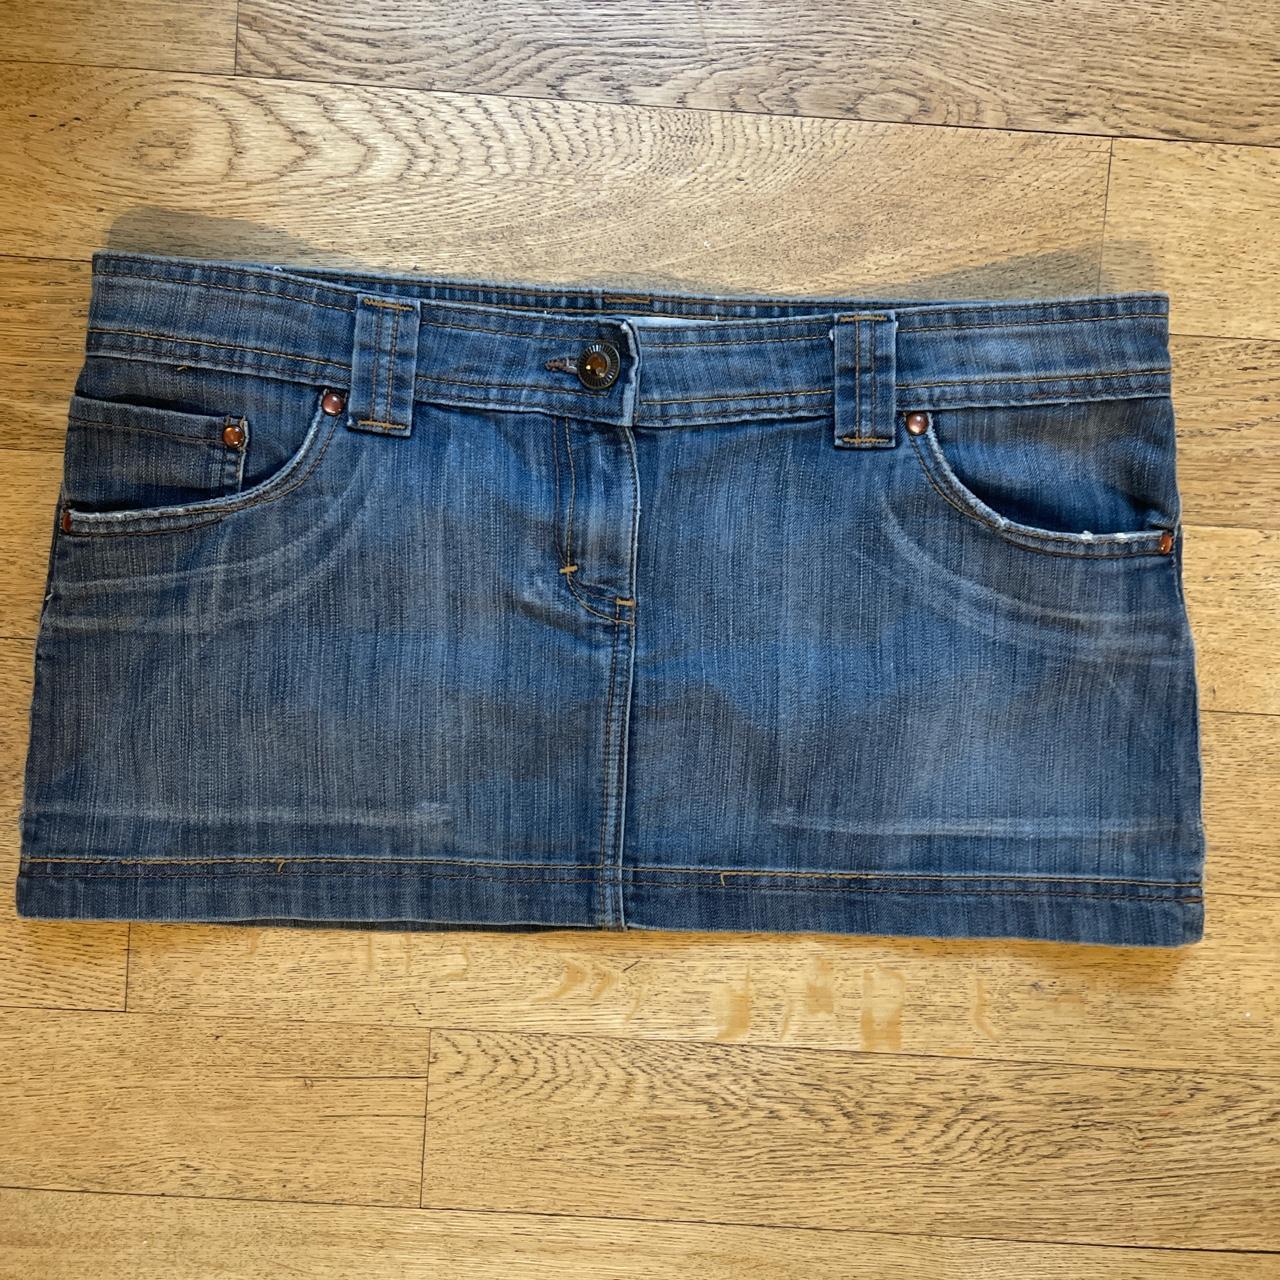 Denim mini skirt with brown leather embroidery on... - Depop